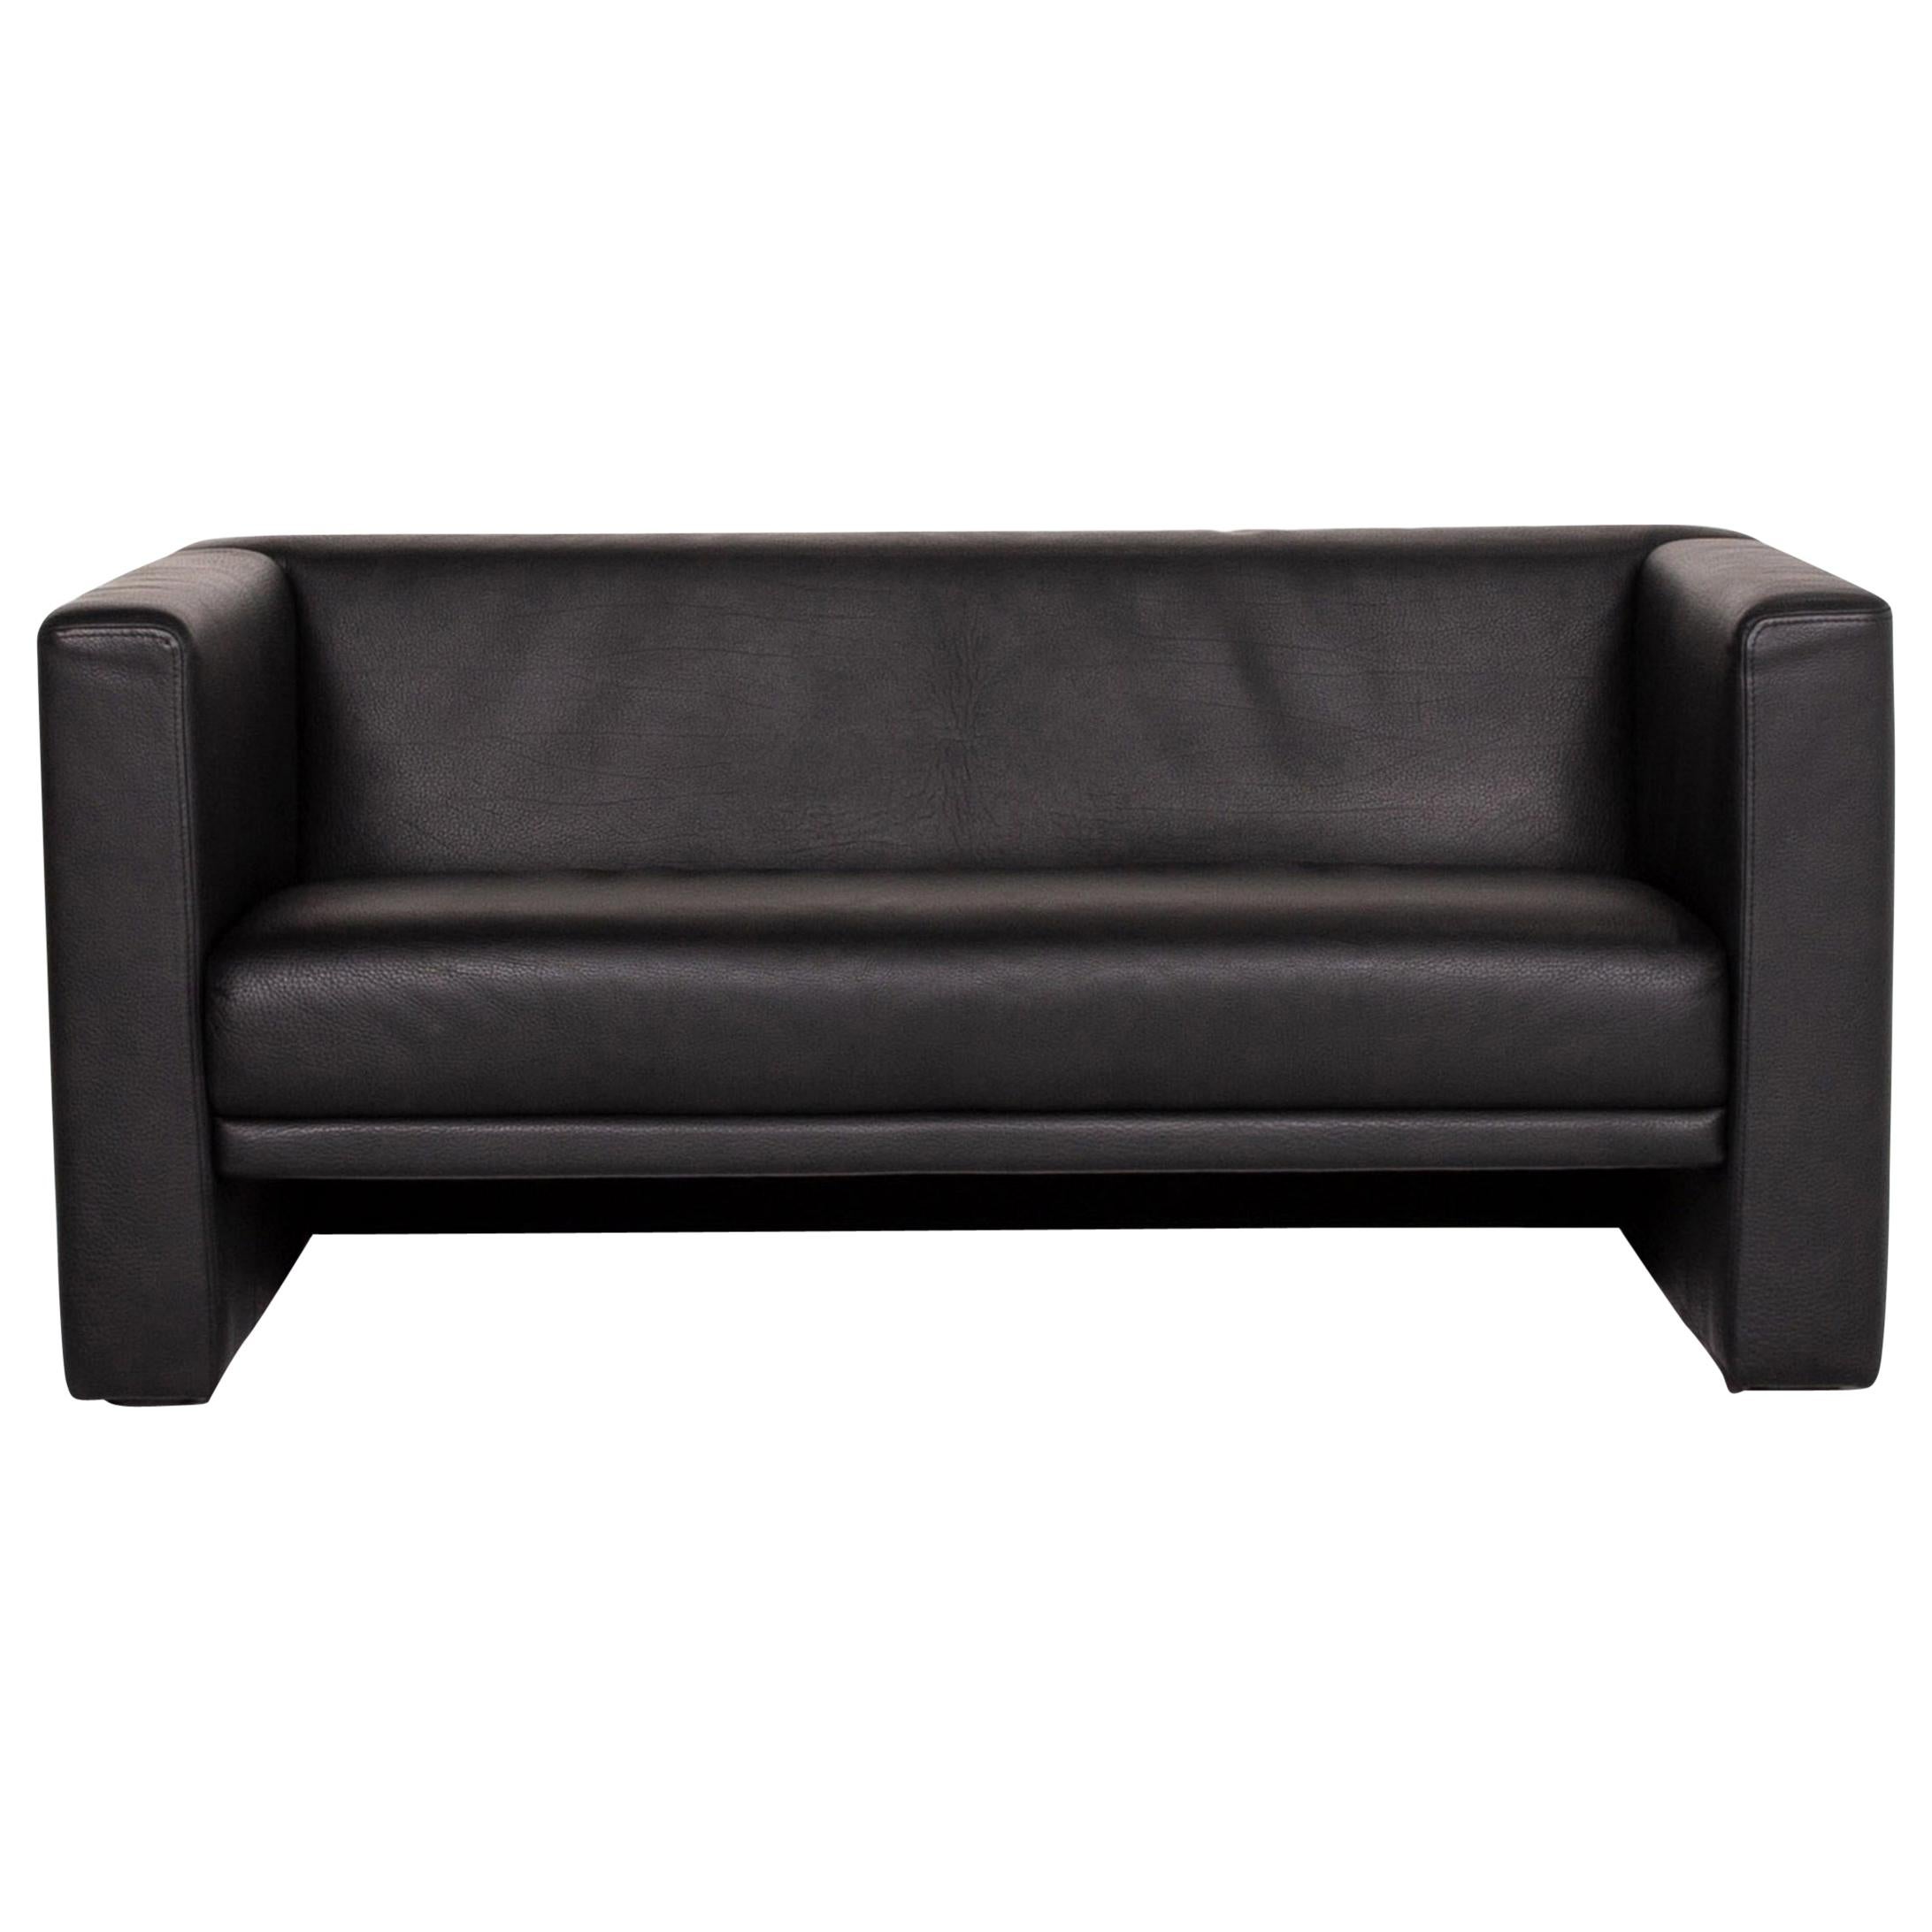 Brühl & Sippold Visavis Leather Sofa Black Two-Seat Couch For Sale